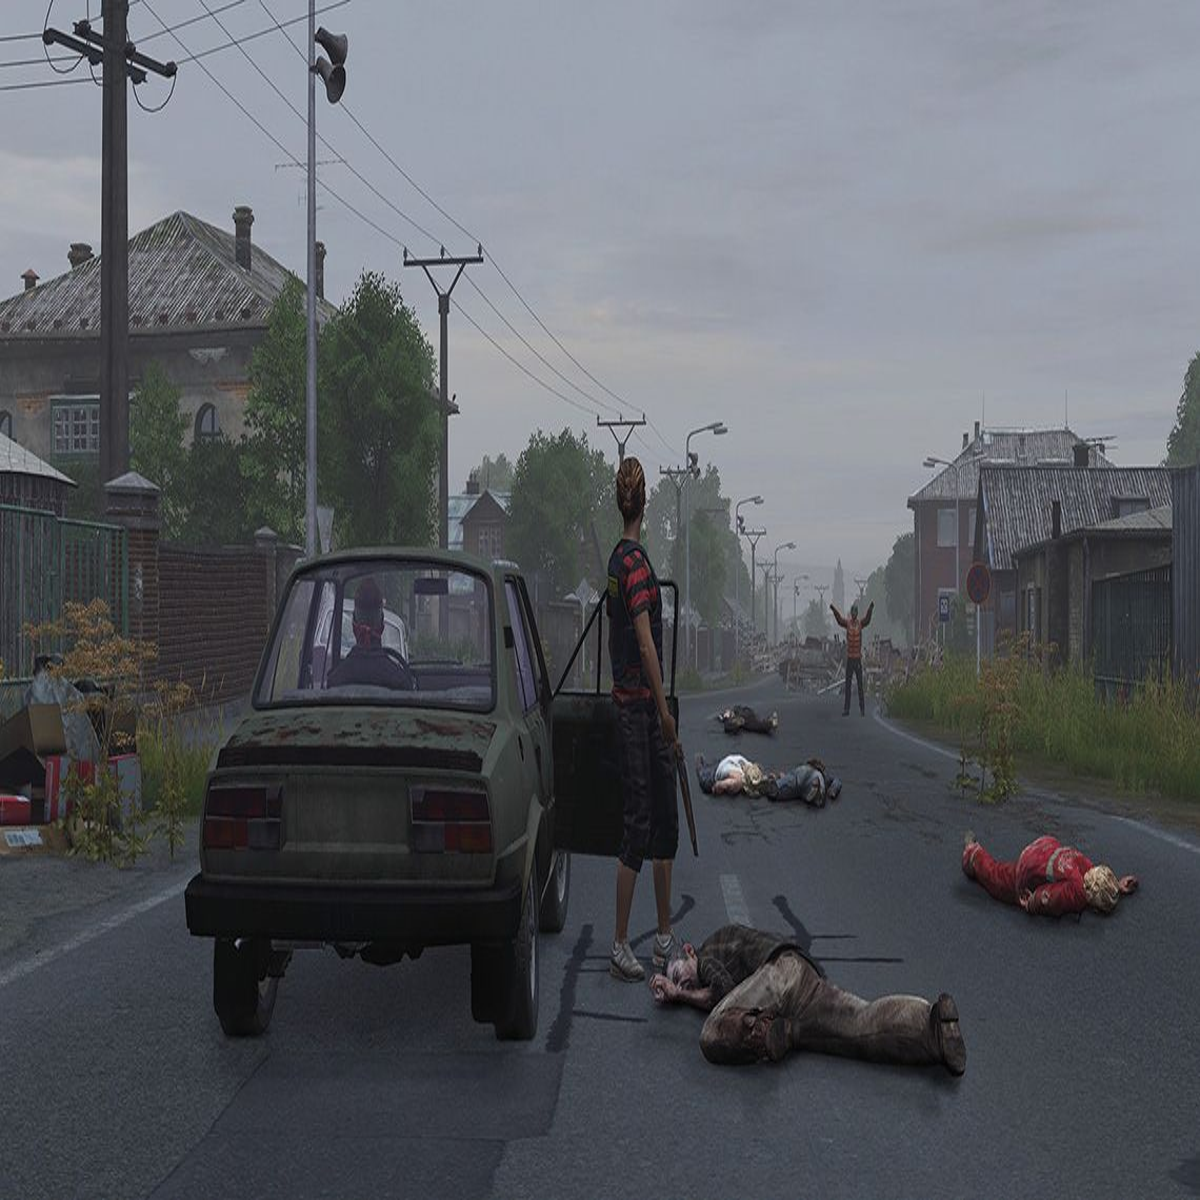 DayZ 2 Is Apparently in Development, Say Court Documents